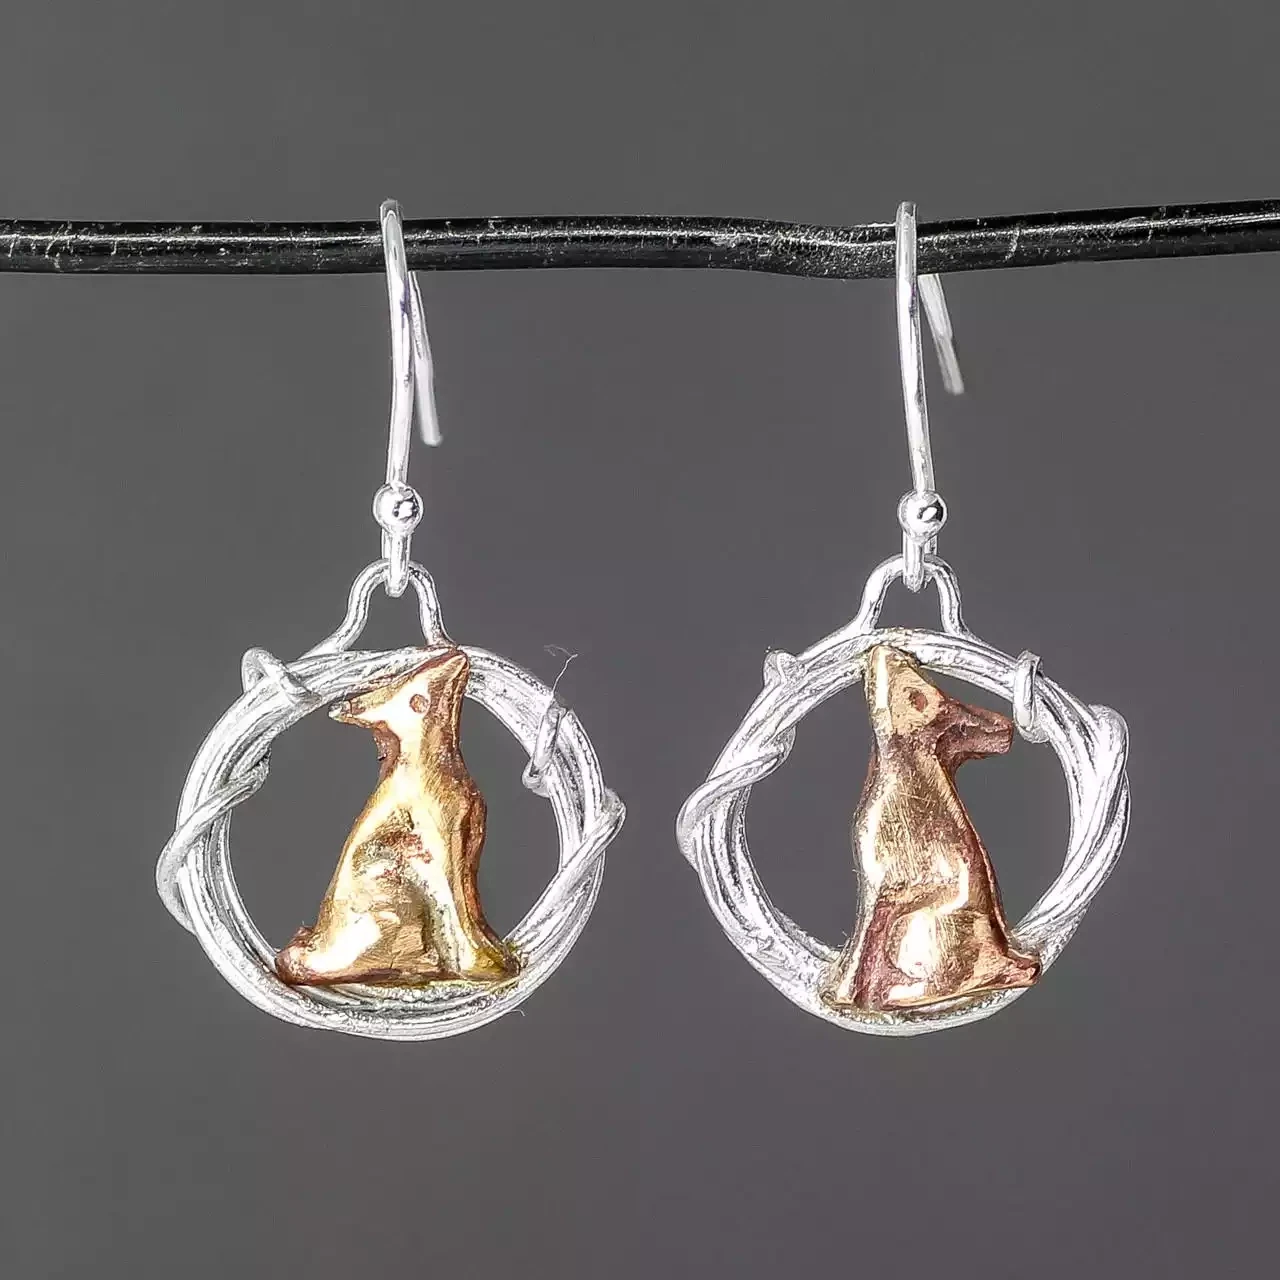 Moongazing Hare in Hoop Silver and Bronze Earrings by Xuella Arnold